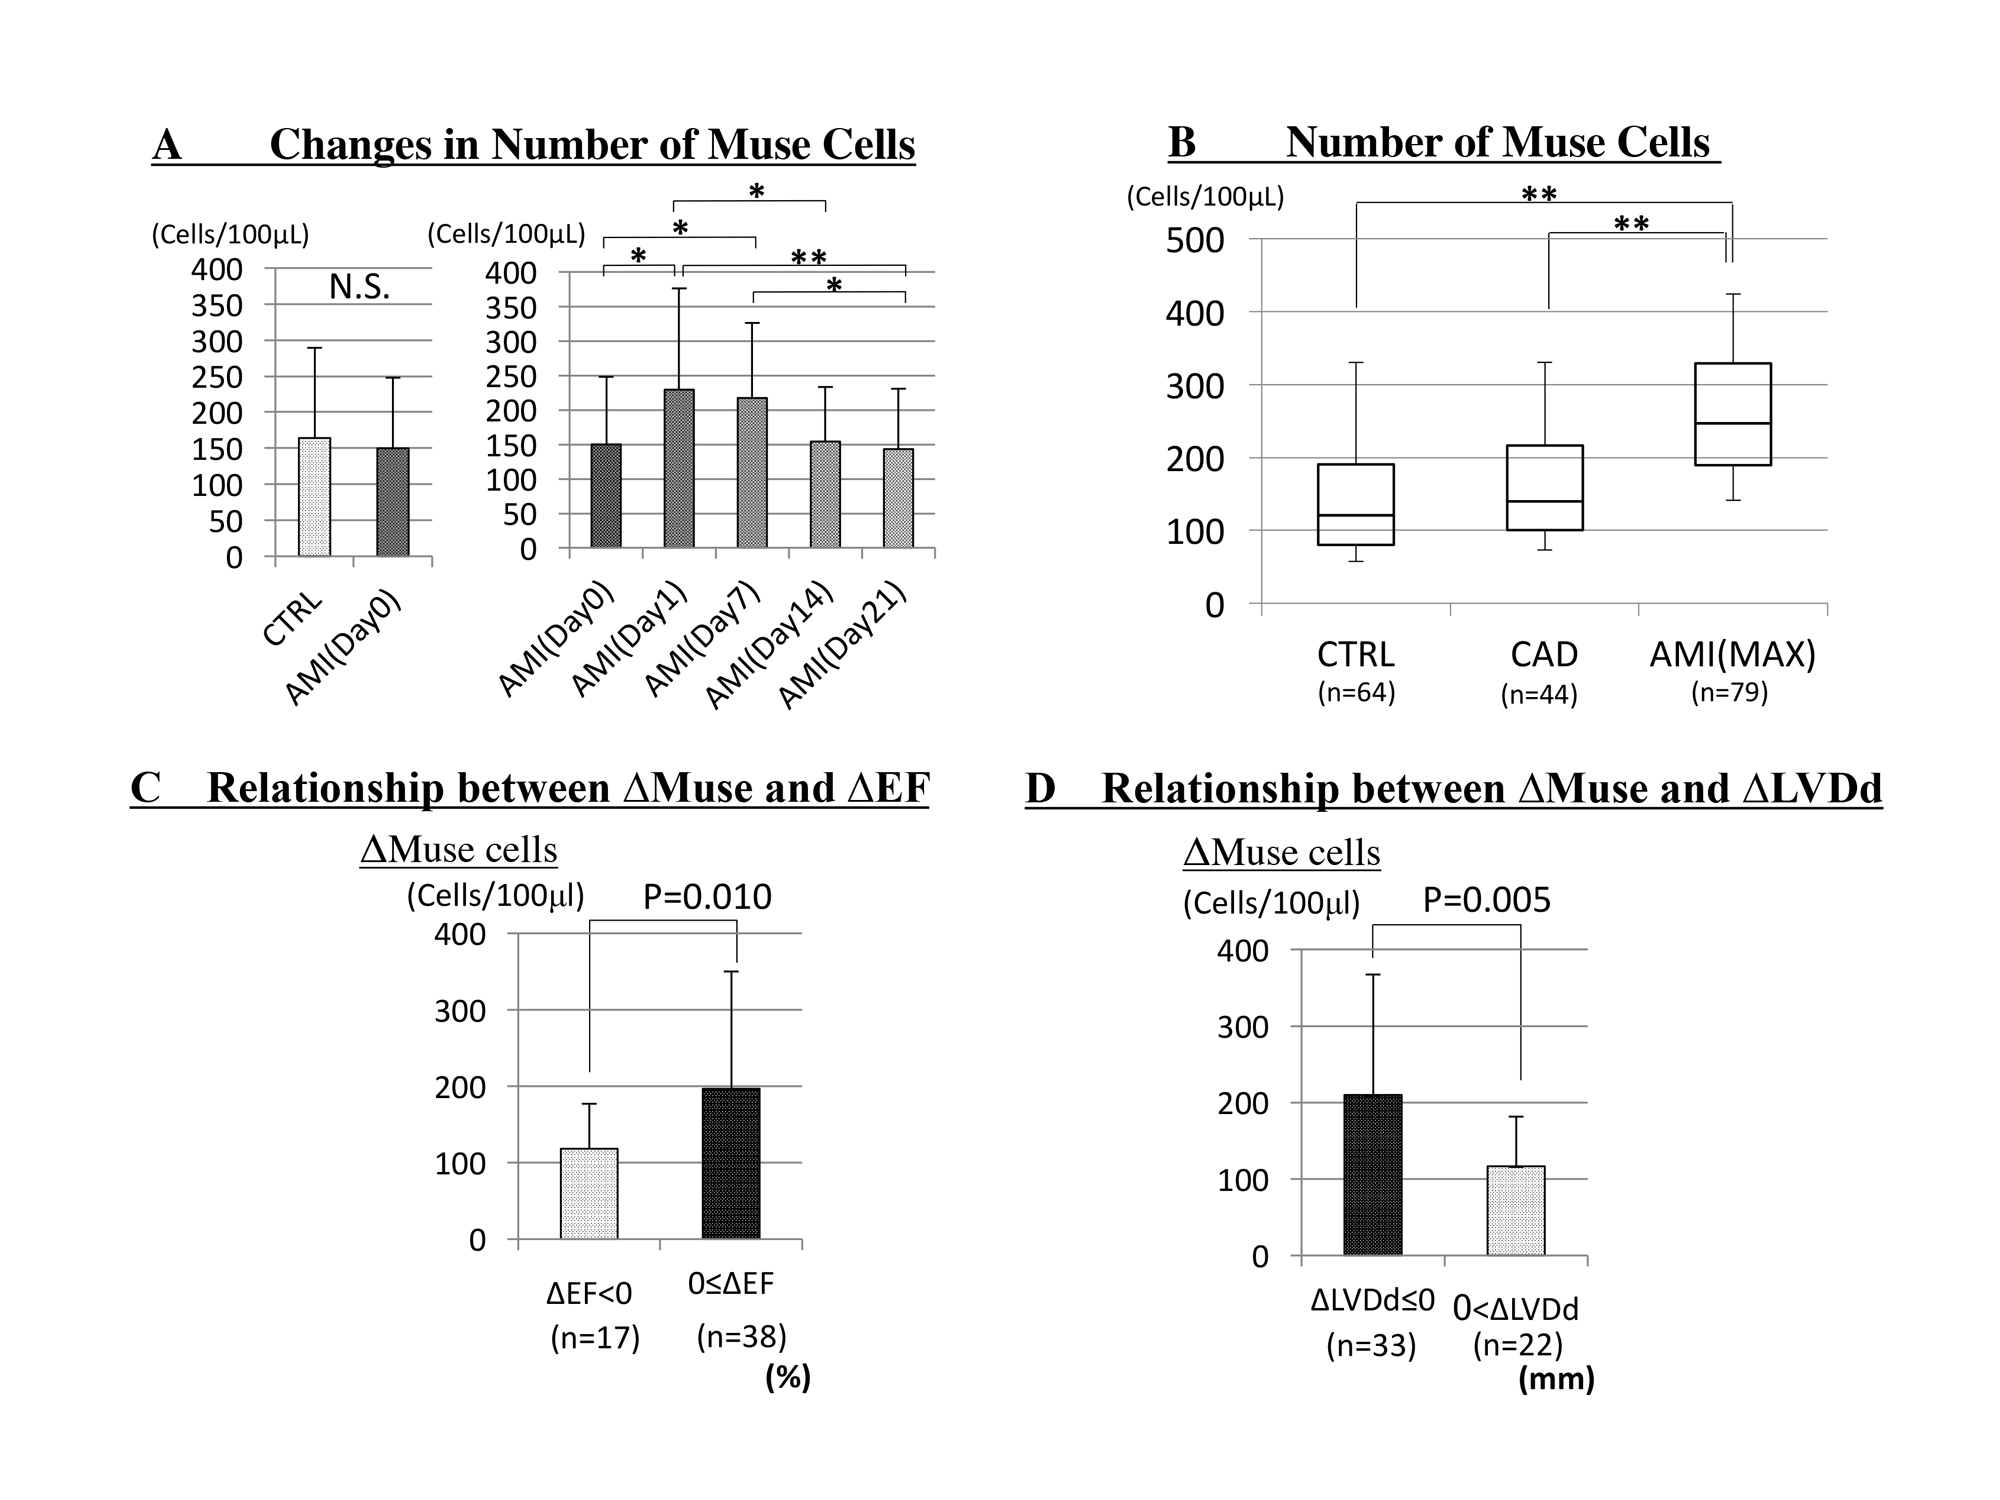 Figure 1. A, Changes in Muse cell numbers with time in the peripheral blood of AMI patients. B, Muse cell numbers in the peripheral blood of AMI patients, CAD patients and subjects with normal coronary arteries (control). C, Relationship between the increase in the number of Muse cells (ΔMuse) in the acute phase and cardiac function improvement in the chronic phase measured as the change in ejection fraction (ΔEF). D, Relationship between ΔMuse in the acute phase and ΔLVDd in the chronic phase. * p < 0.05; ** p < 0.01; LVDd, left ventricular end-diastolic dimension.  [Reproduced from Ref. 16]